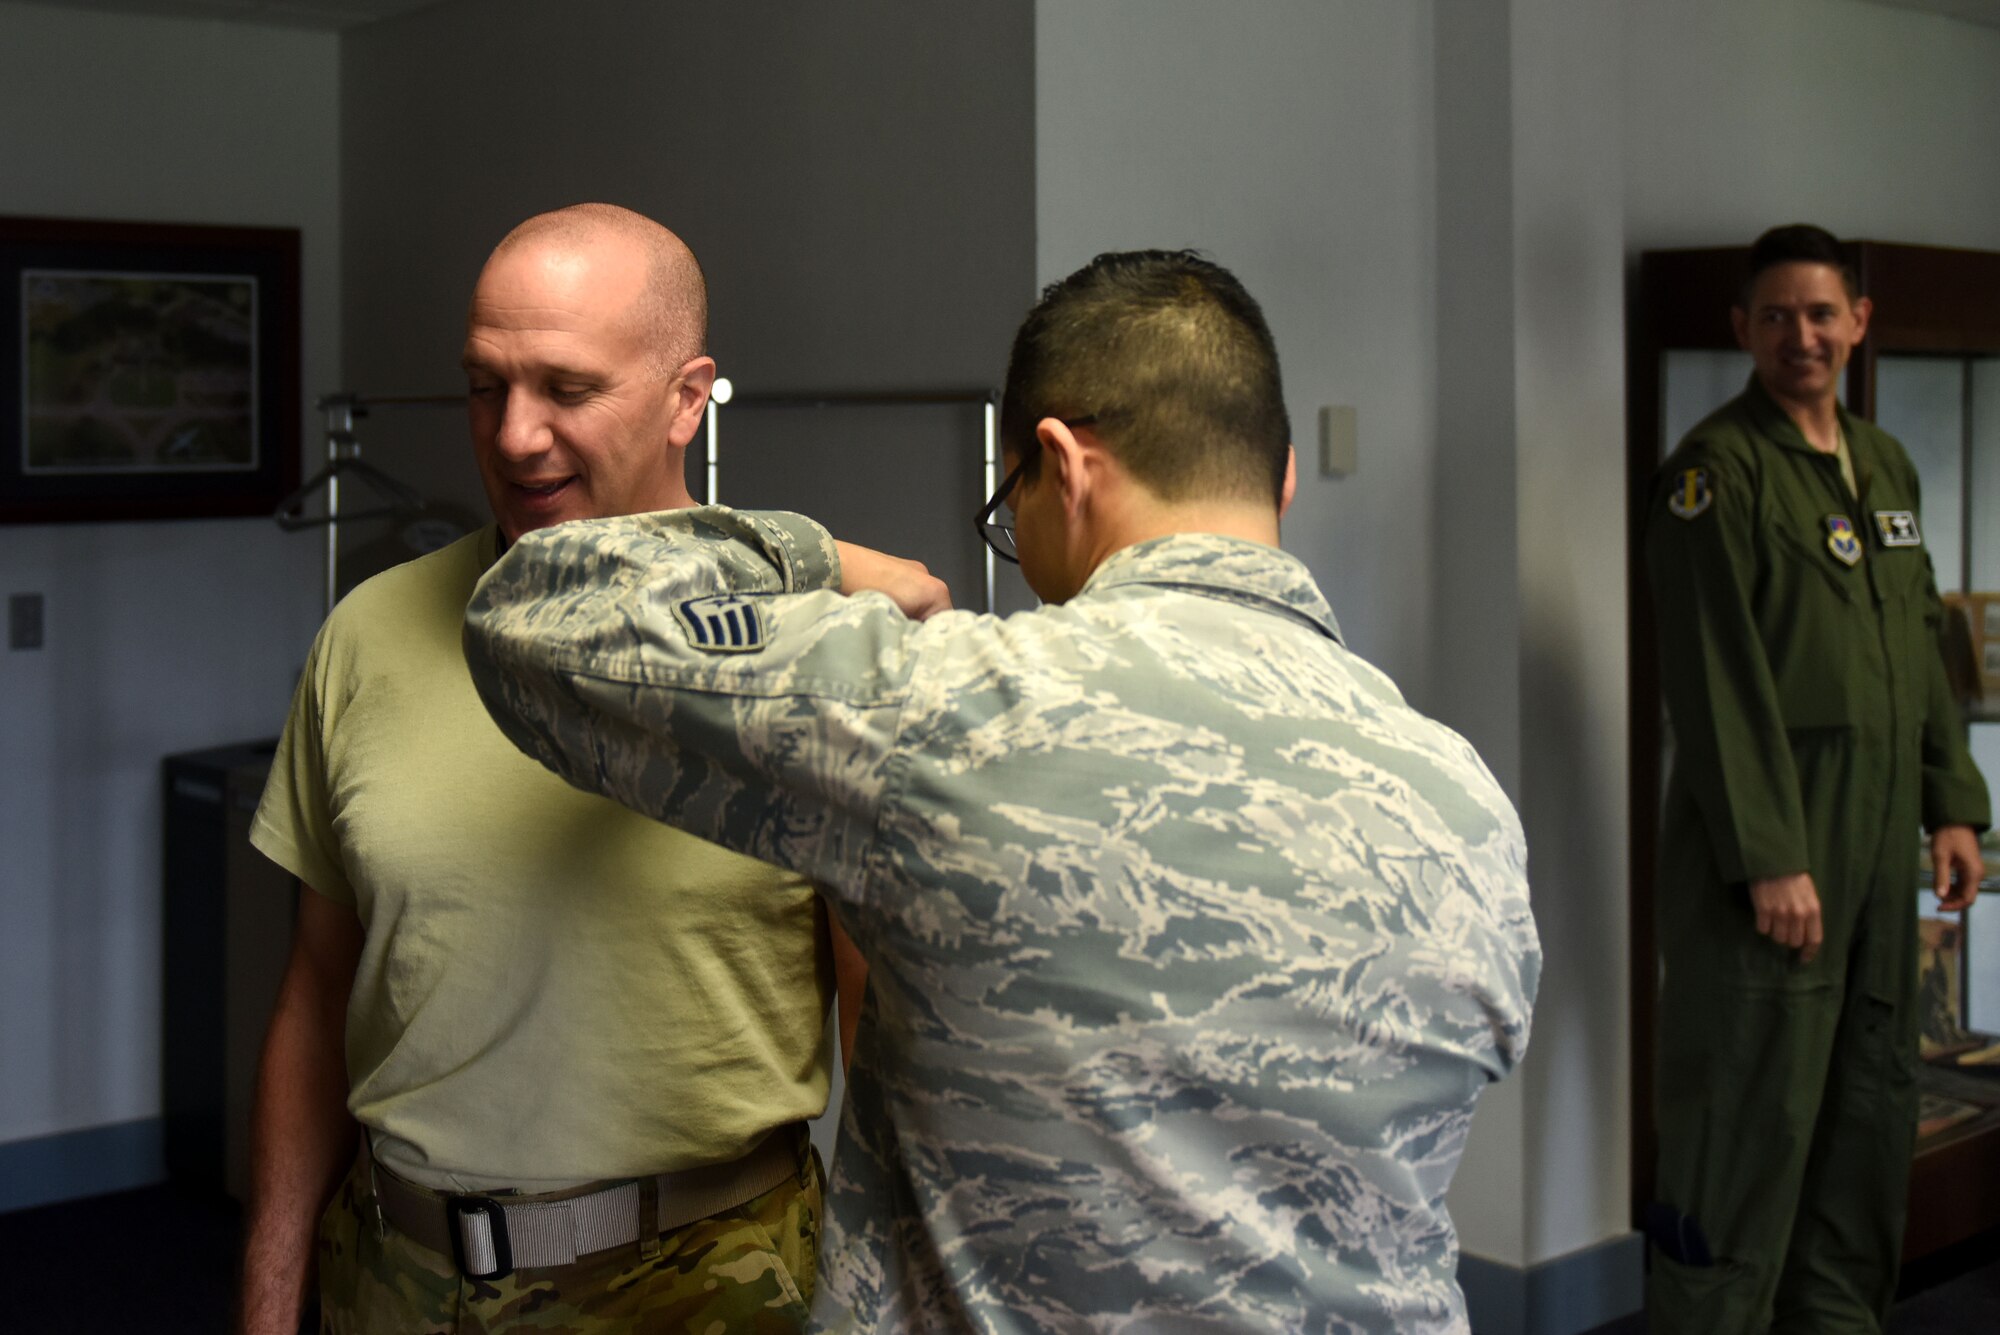 A man wearing a sand t-shirt receives a shot from a man with dark hair and glasses wearing the Airman Battle Uniform.